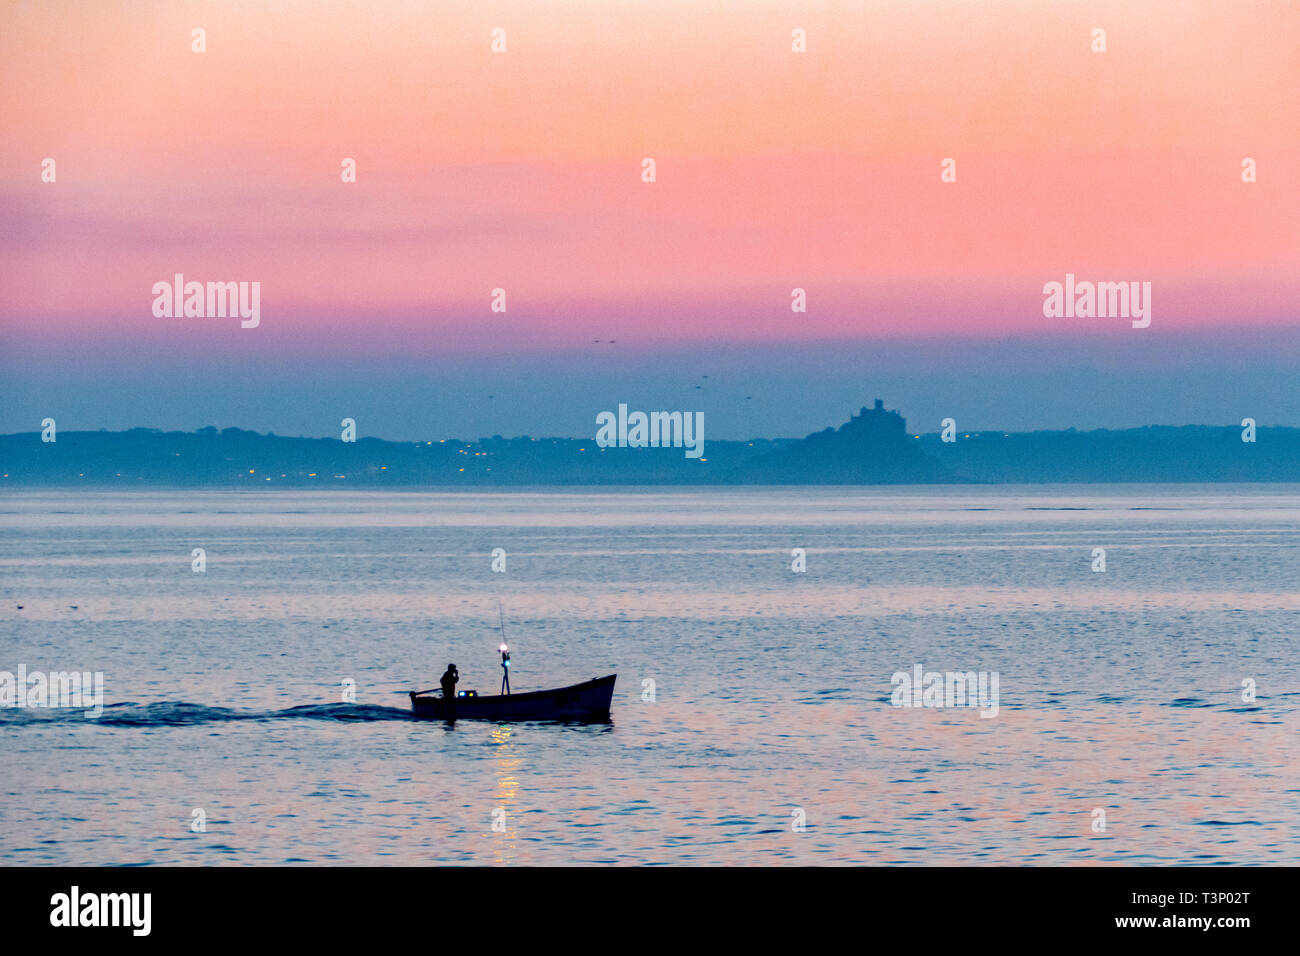 Newlyn, Cornwall, UK. 11th Apr, 2019. UK Weather. A chilly but glorious start to the day at Newlyn at sunrise. Seen here fishing boat from Newlyn. Credit: Simon Maycock/Alamy Live News Stock Photo